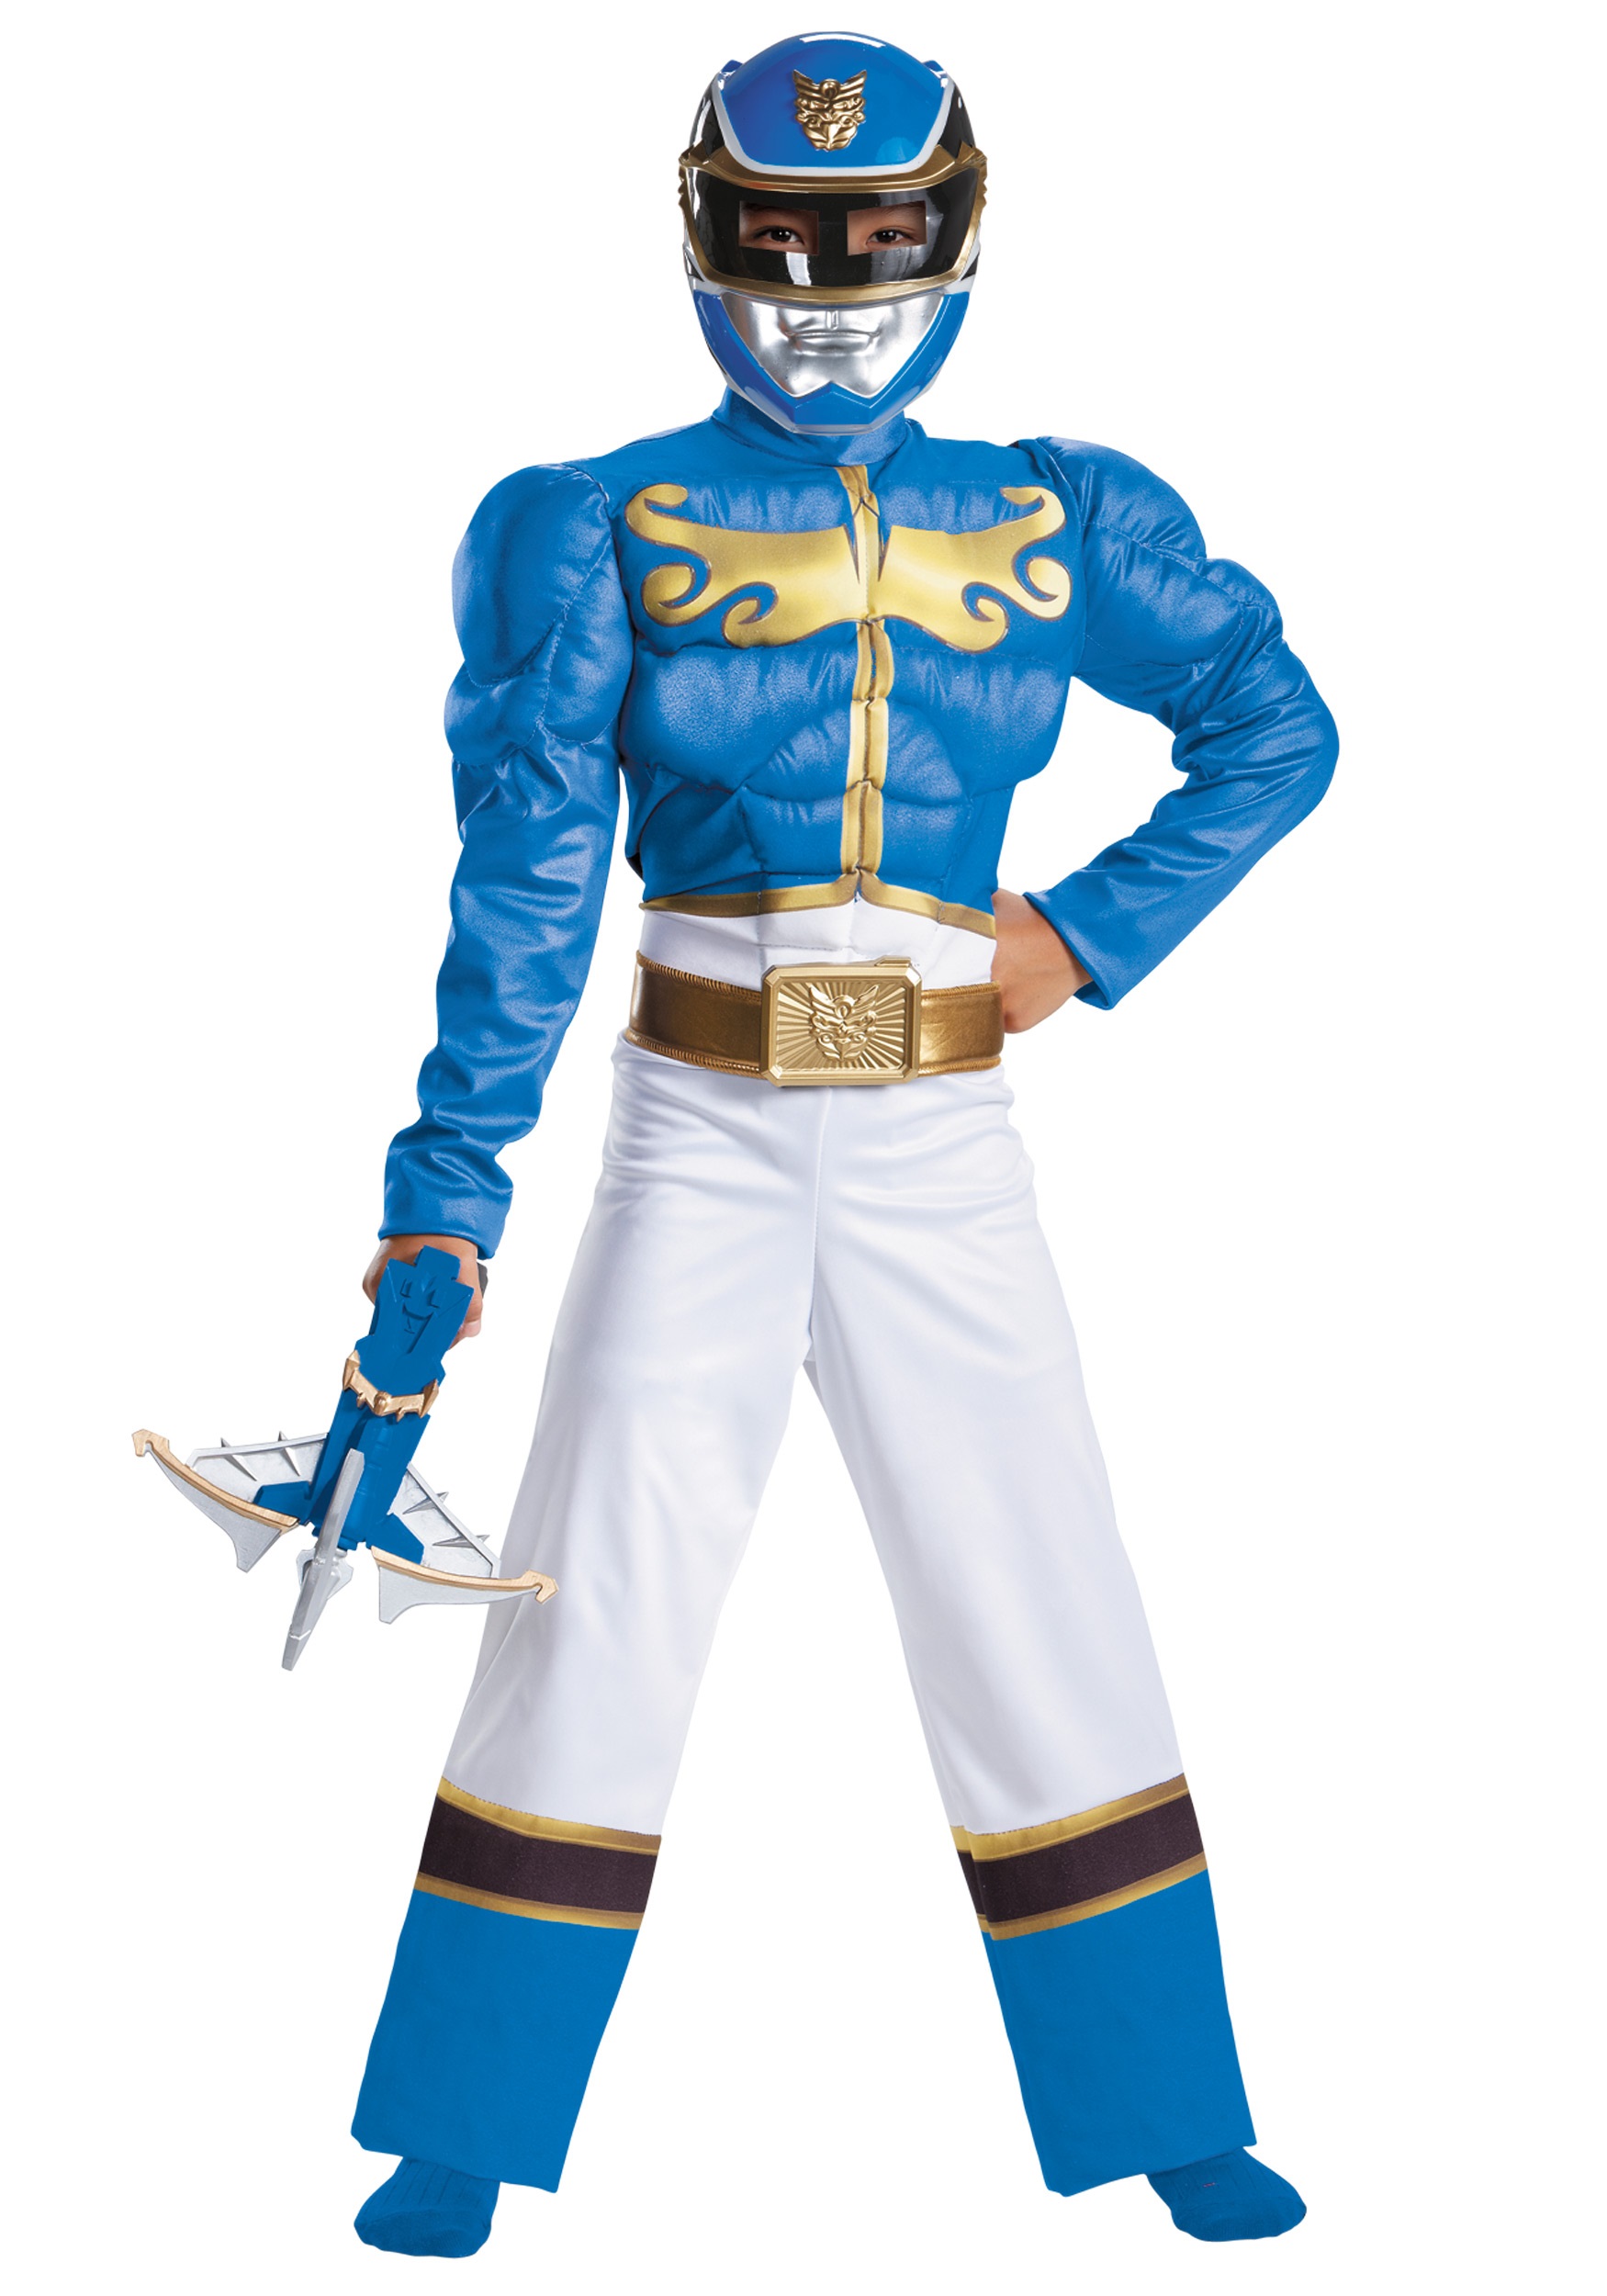 Ranger Megaforce Classic Muscle Costume with Free Shipping in U.S., UK, Eur...